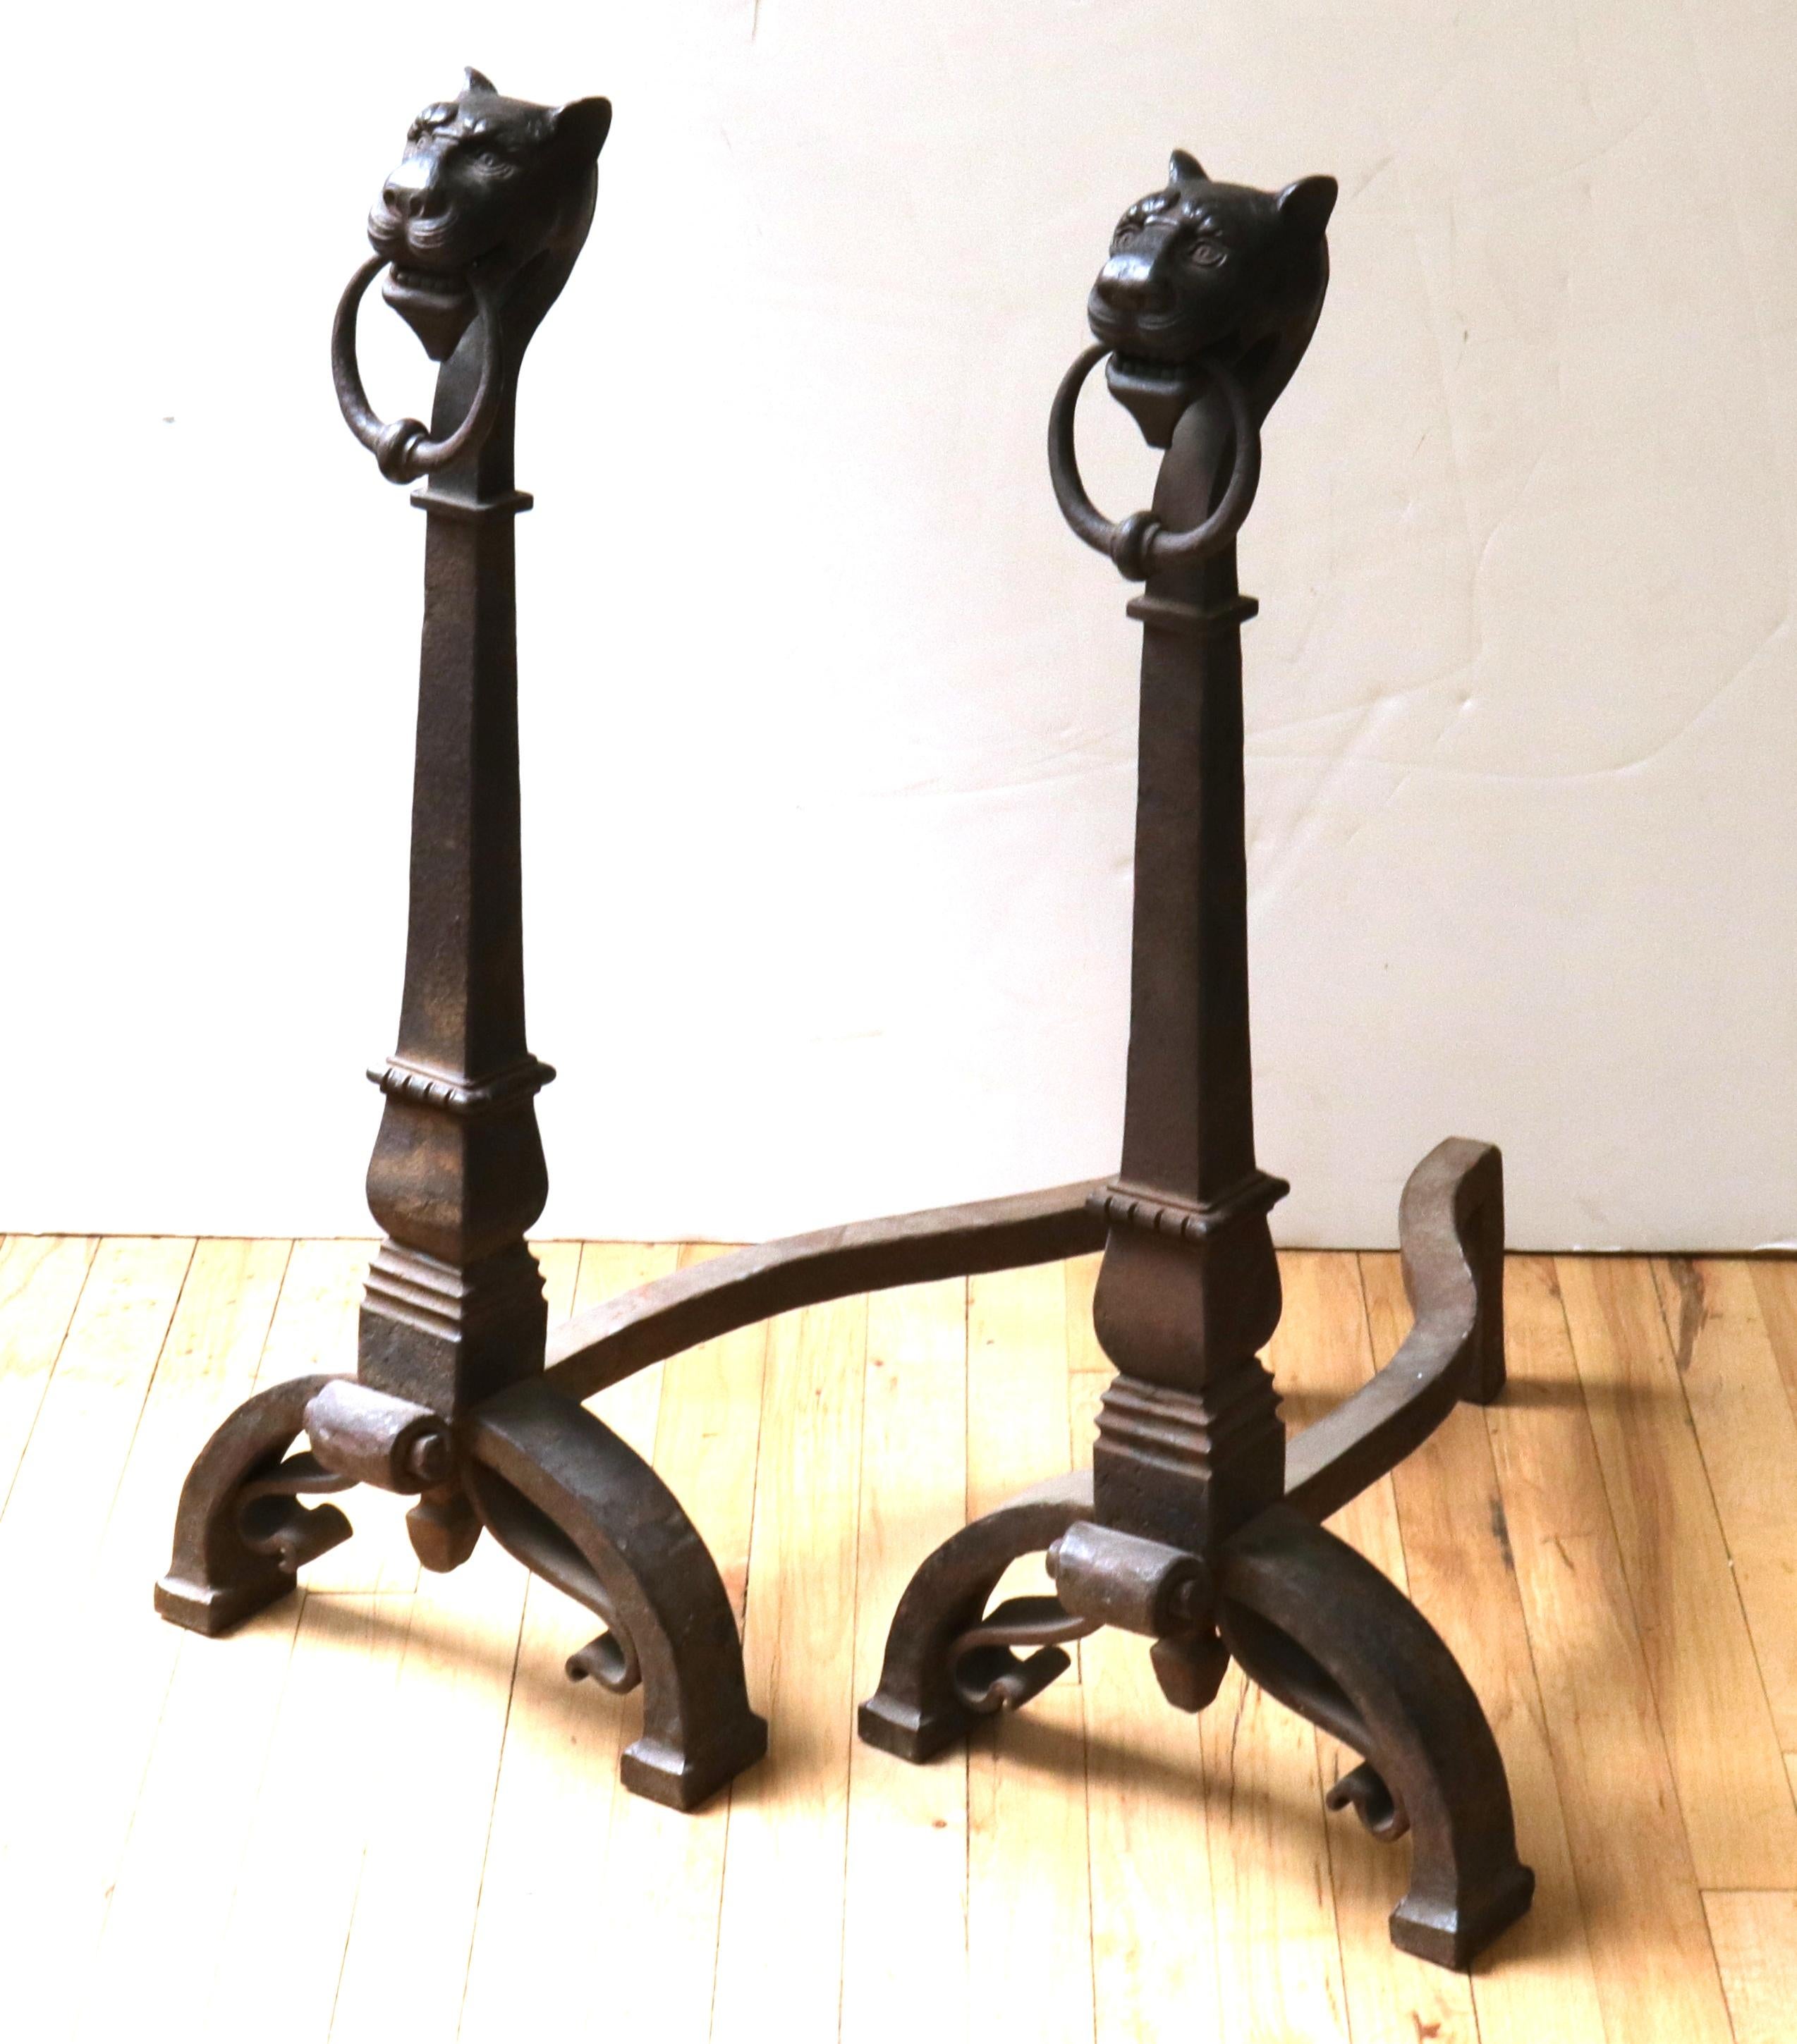 Continental 18th century pair of wrought iron andirons with finely detailed lion heads. The pair was made in Europe during the 18th century and is in great antique condition with age-appropriate wear and use and a desirable natural patina.